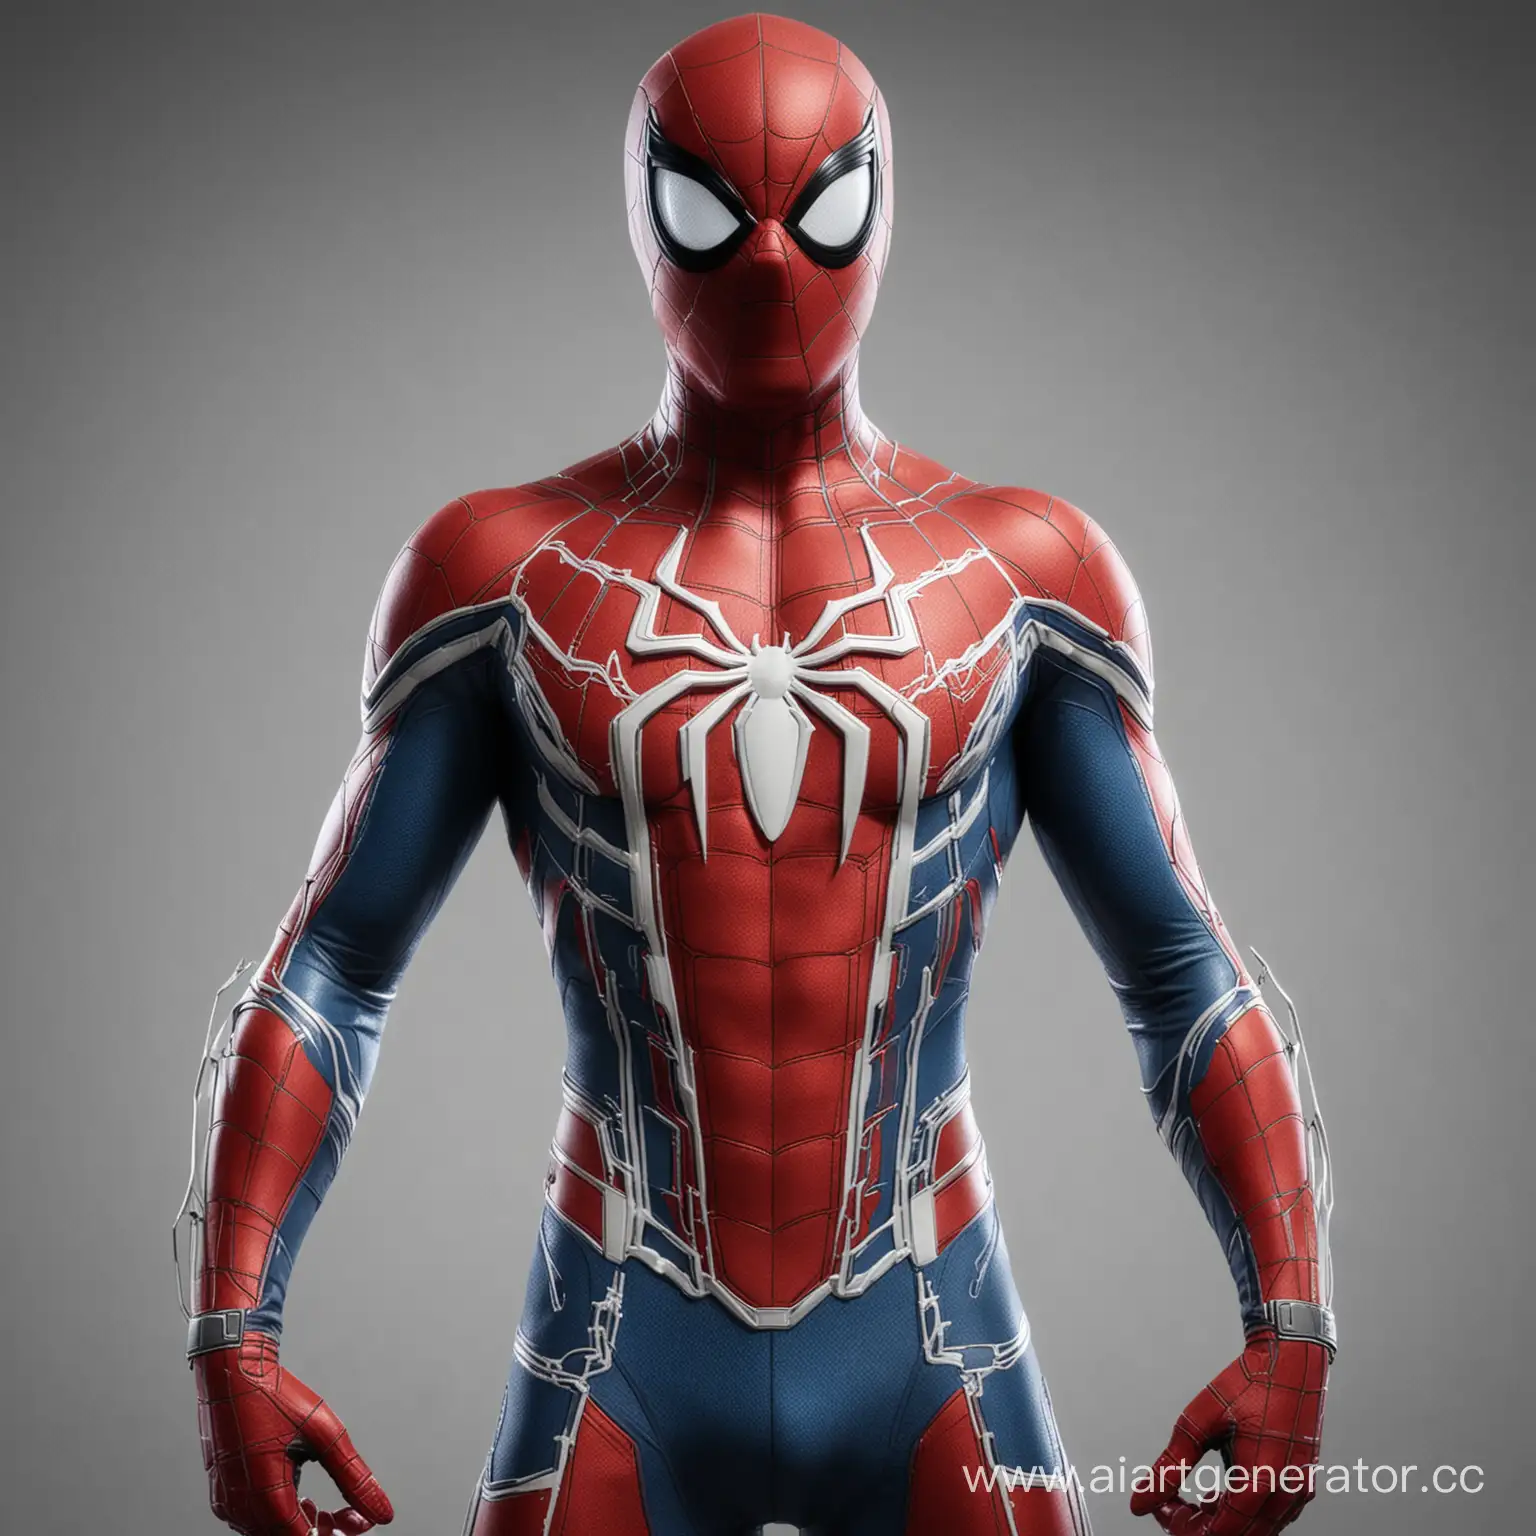 Futuristic-SpiderMan-Suit-with-Glowing-Lenses-and-Mechanical-Spider-Legs